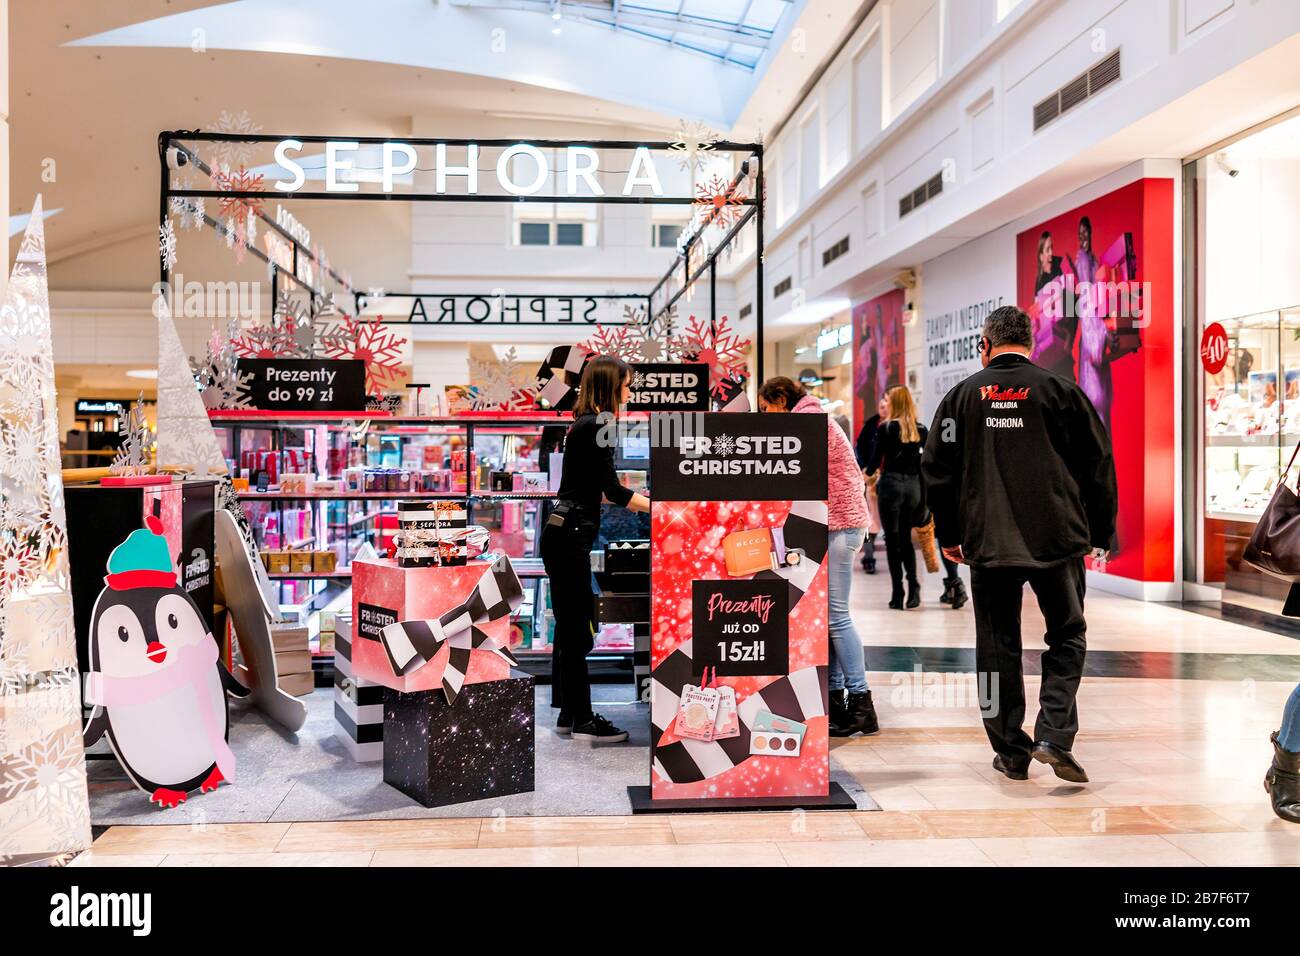 Sephora Storefront High Resolution Stock Photography and Images - Alamy